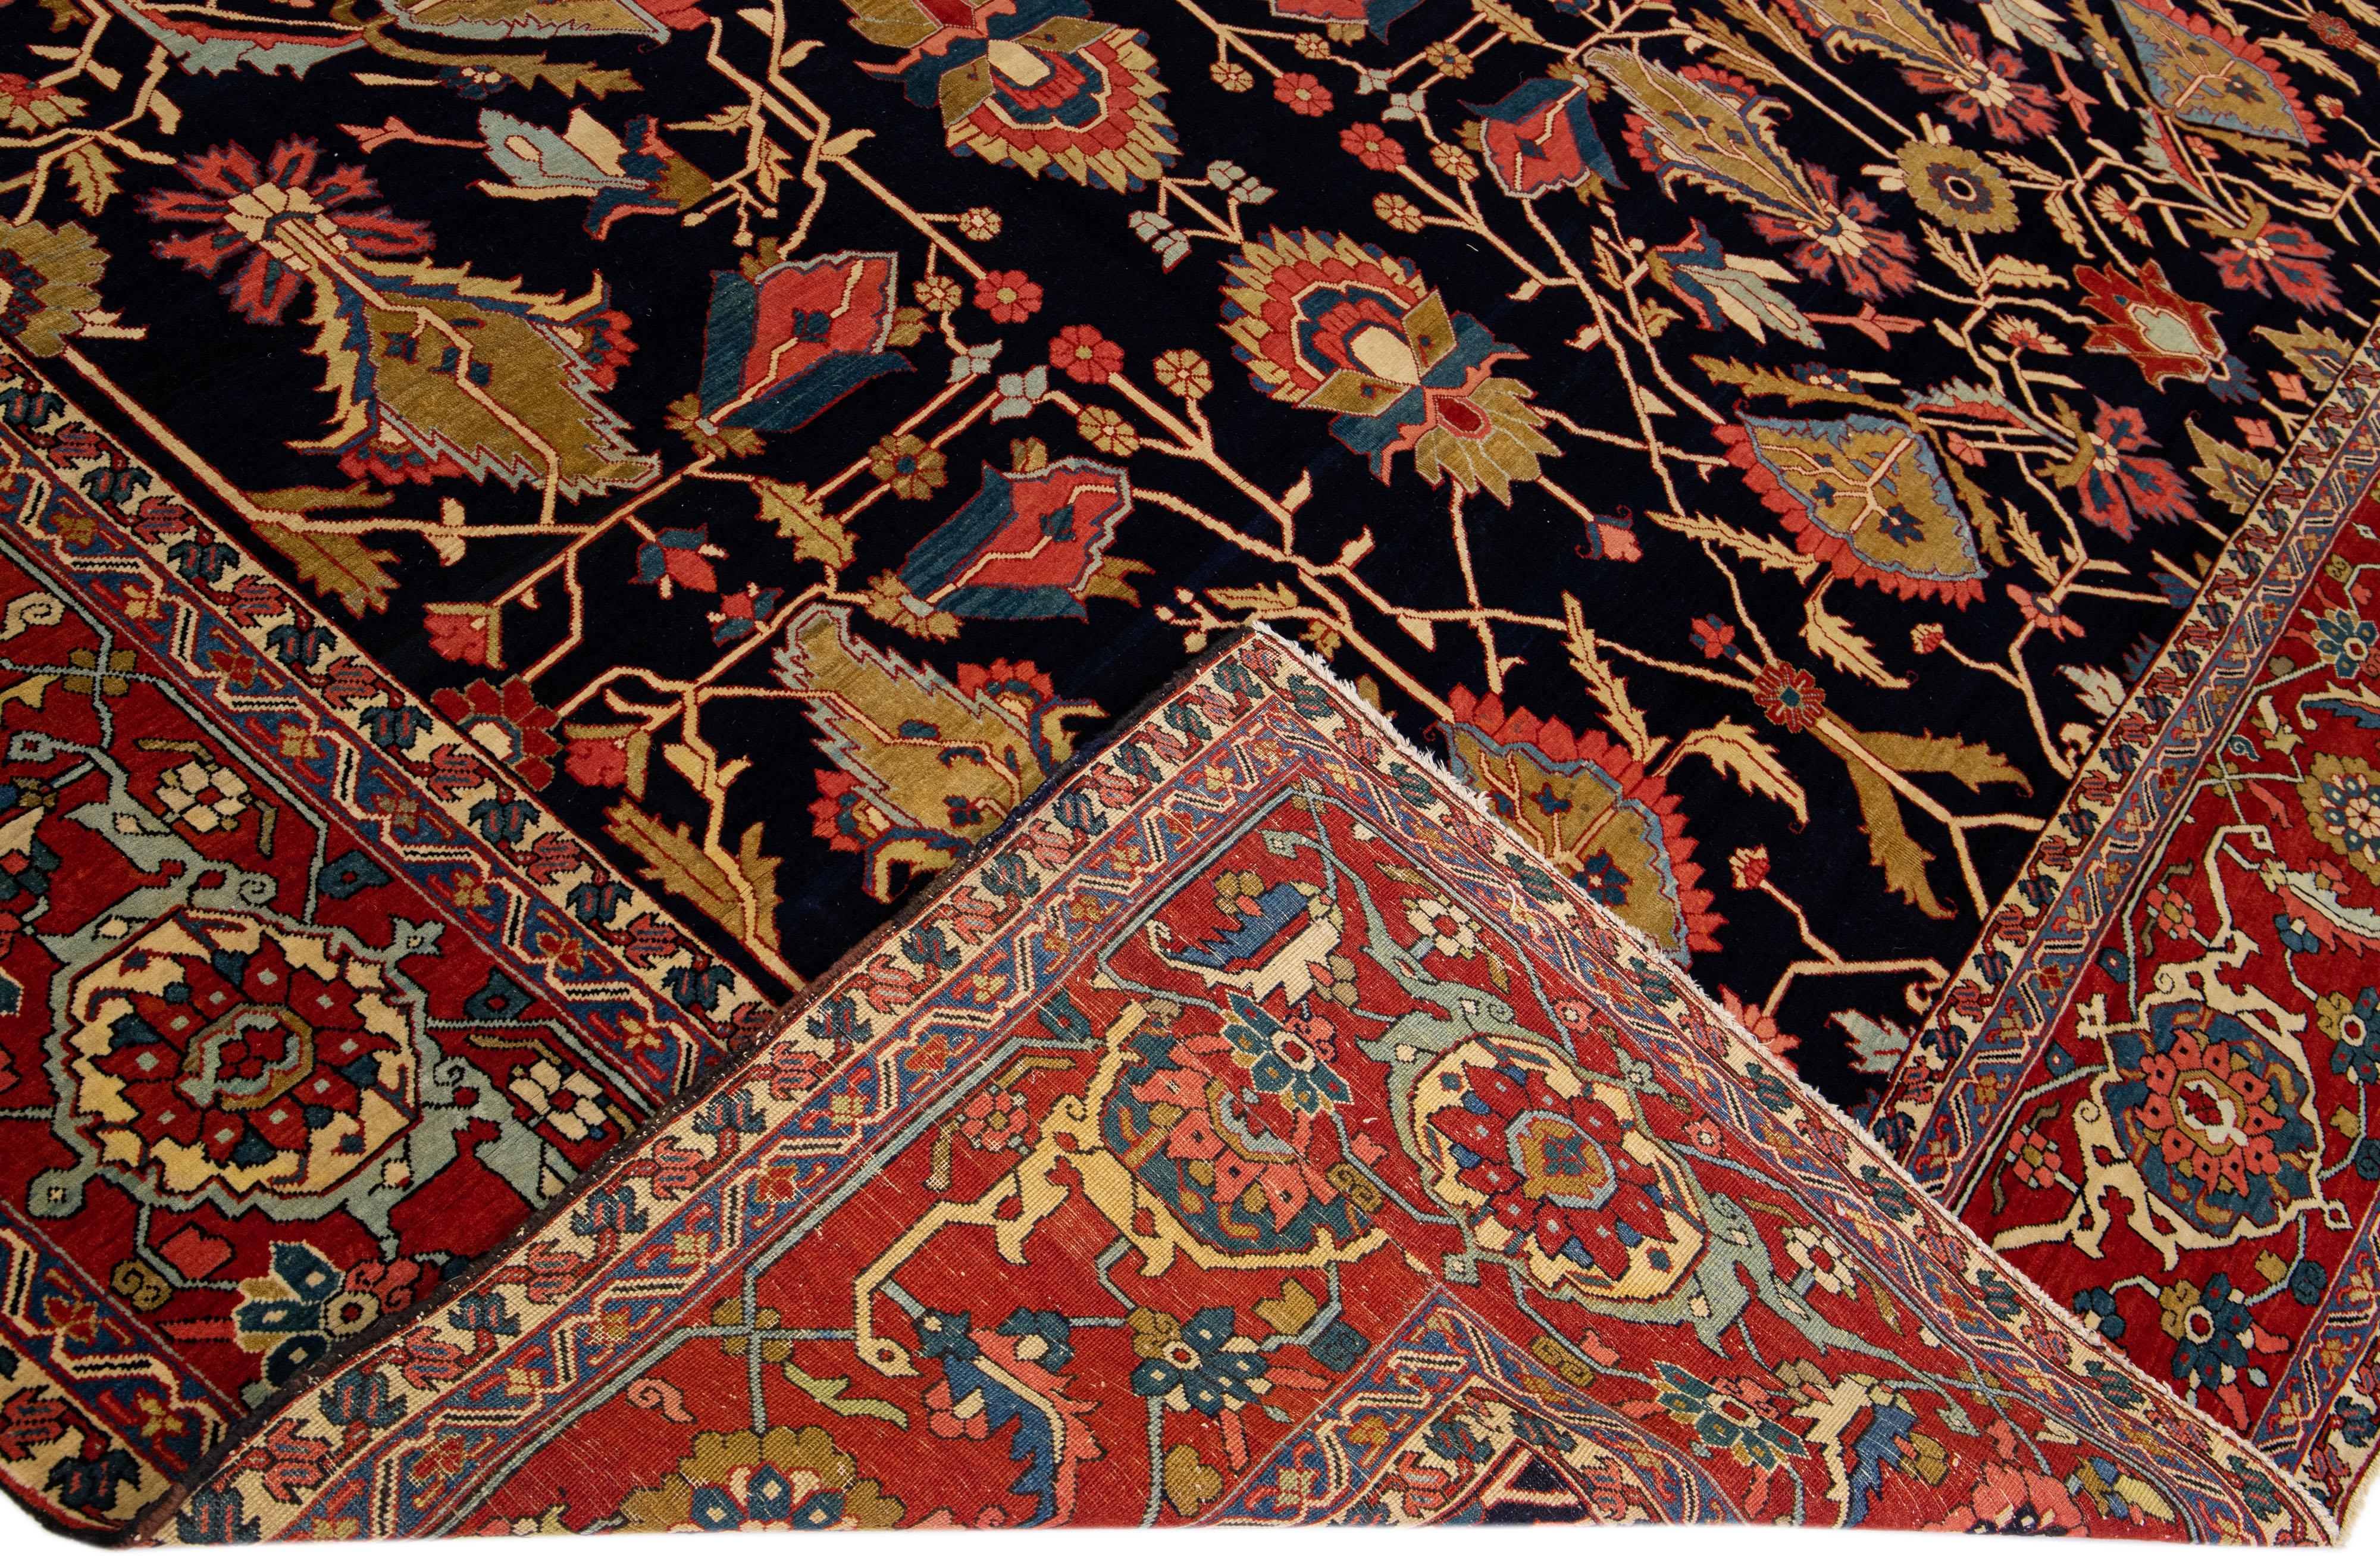 Beautiful Antique Serapi hand-knotted wool rug with a dark blue field. This Persian rug has a red frame and multi-color accents in a gorgeous all-over geometric floral design.

This rug measures: 13' x 17'.

Our rugs are professional cleaning